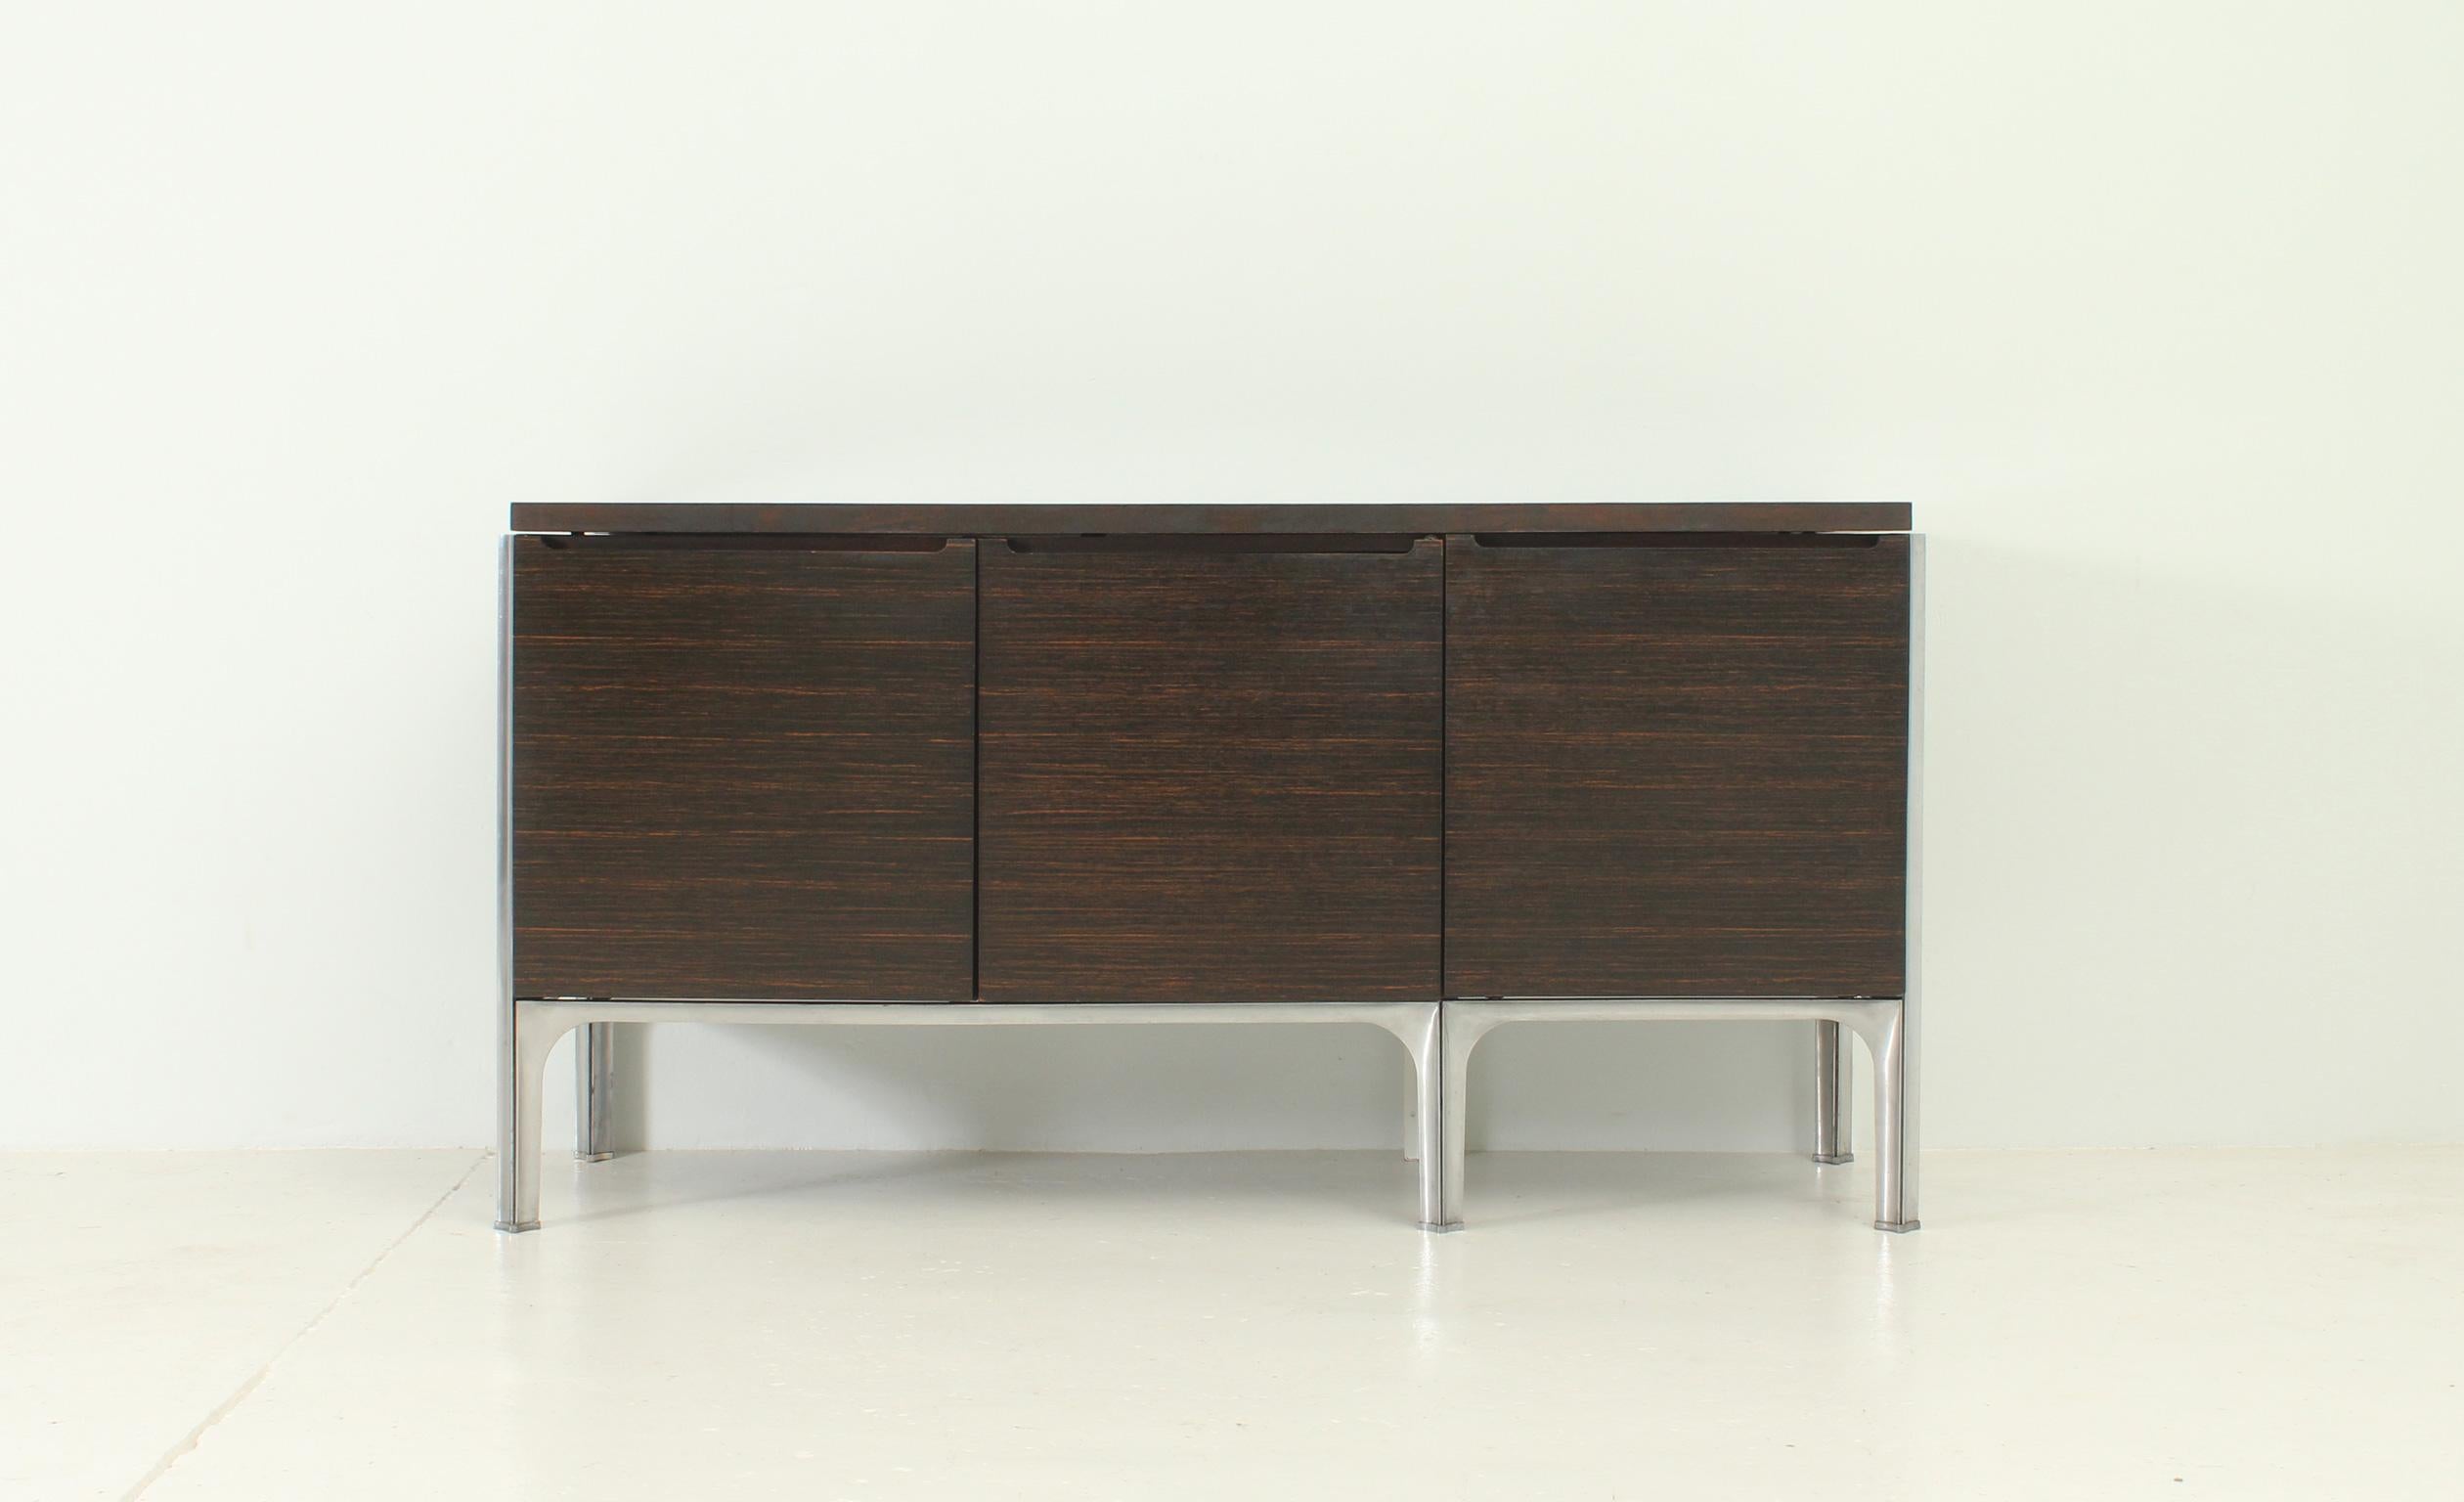 French Rare Sideboard by Raymond Loewy edited by DF 2000, 1960s For Sale